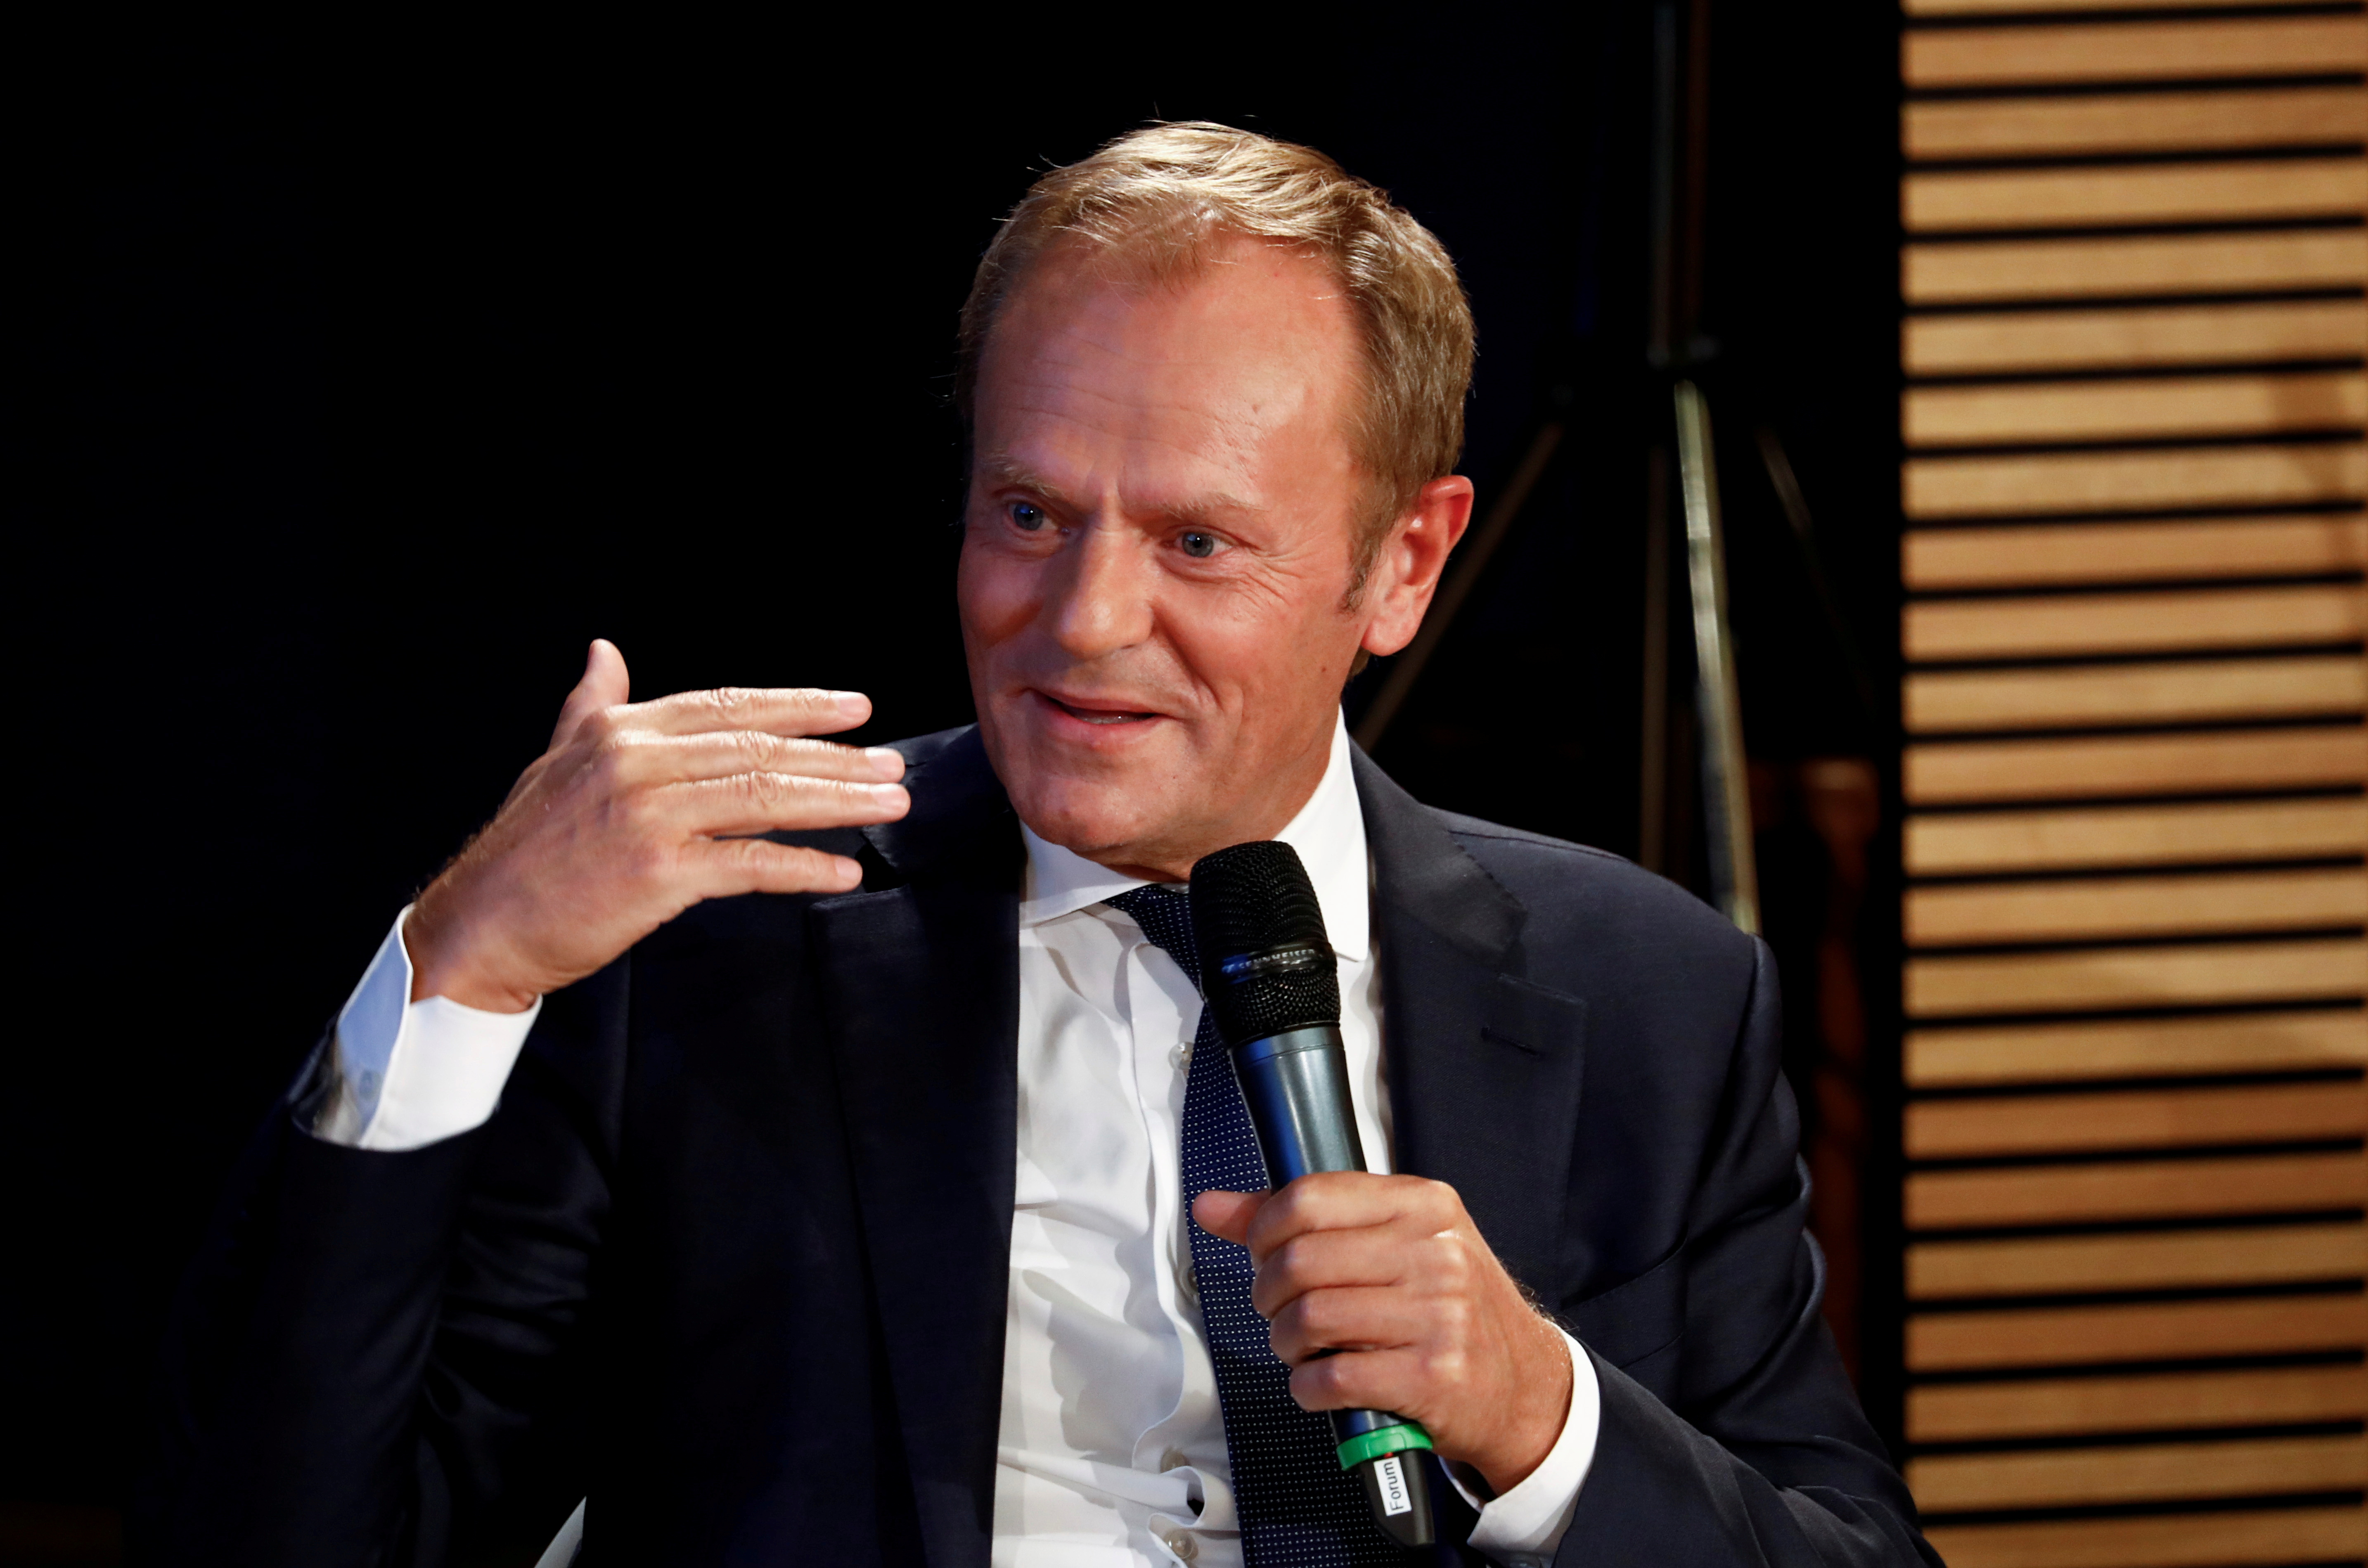 Former EU Council President Donald Tusk at an event on Sept. 10, 2020